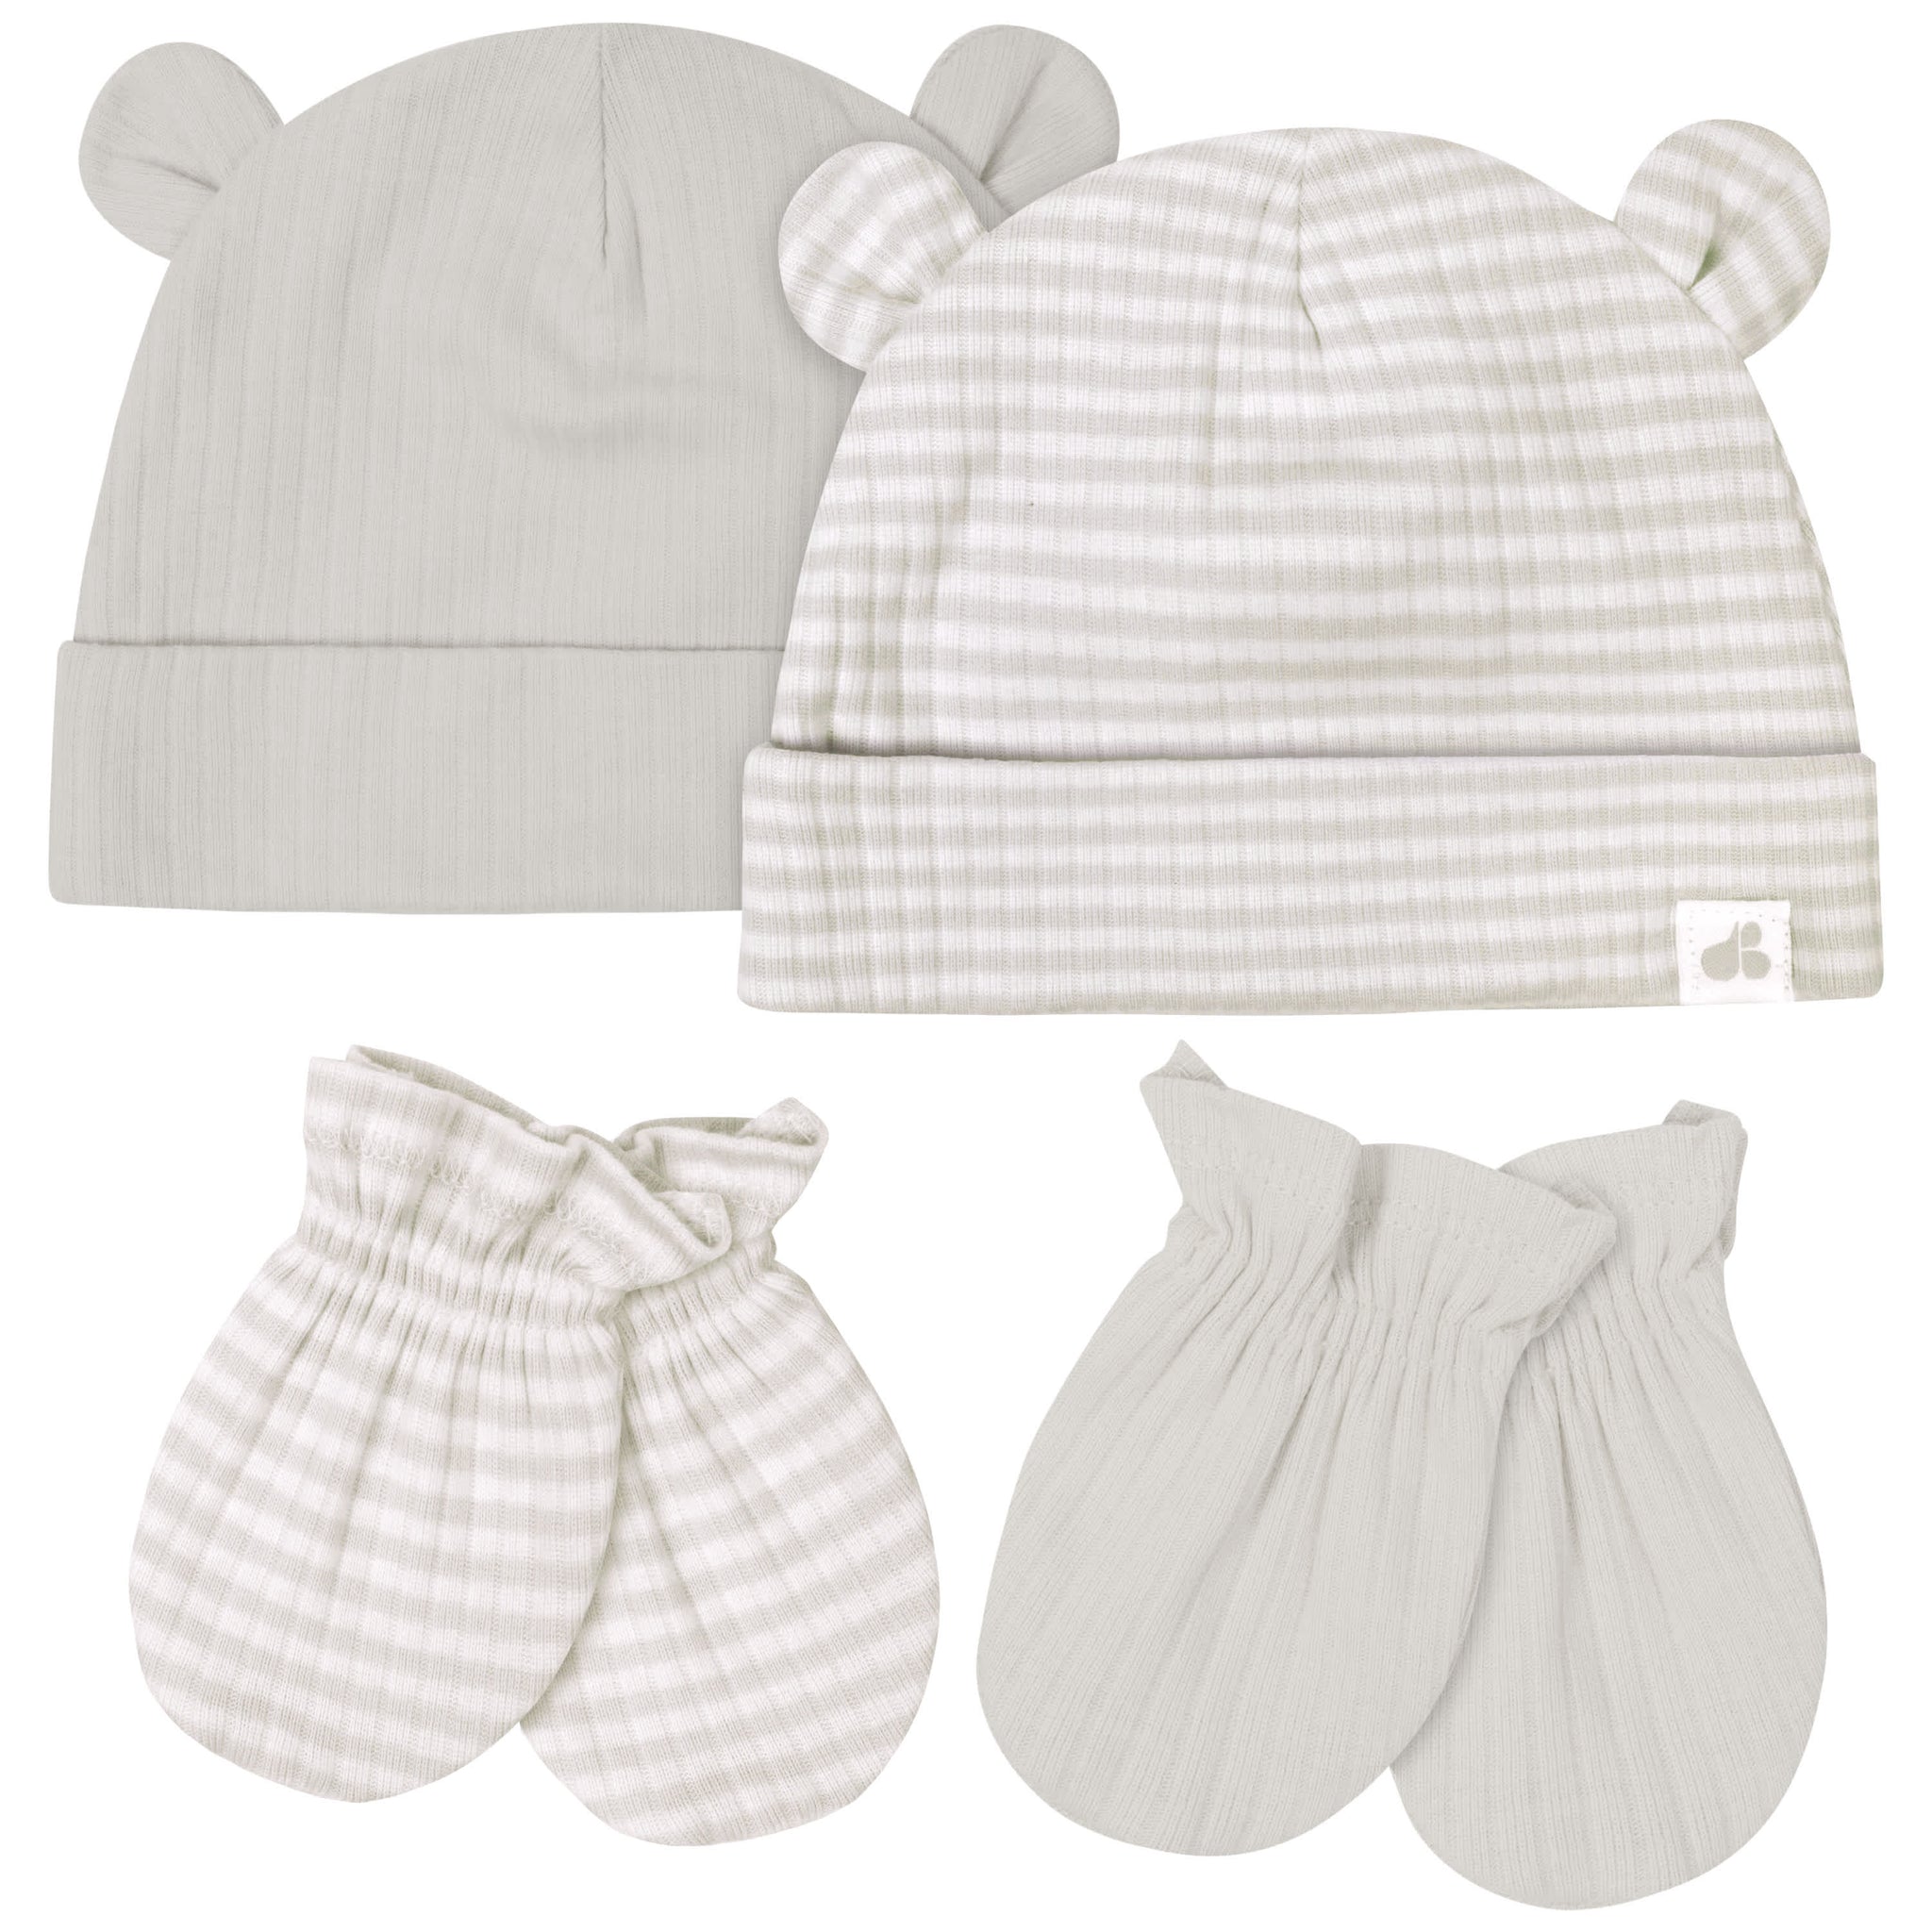 4-Piece Baby Neutral Natural Leaves Caps & Mittens Set-Gerber Childrenswear Wholesale